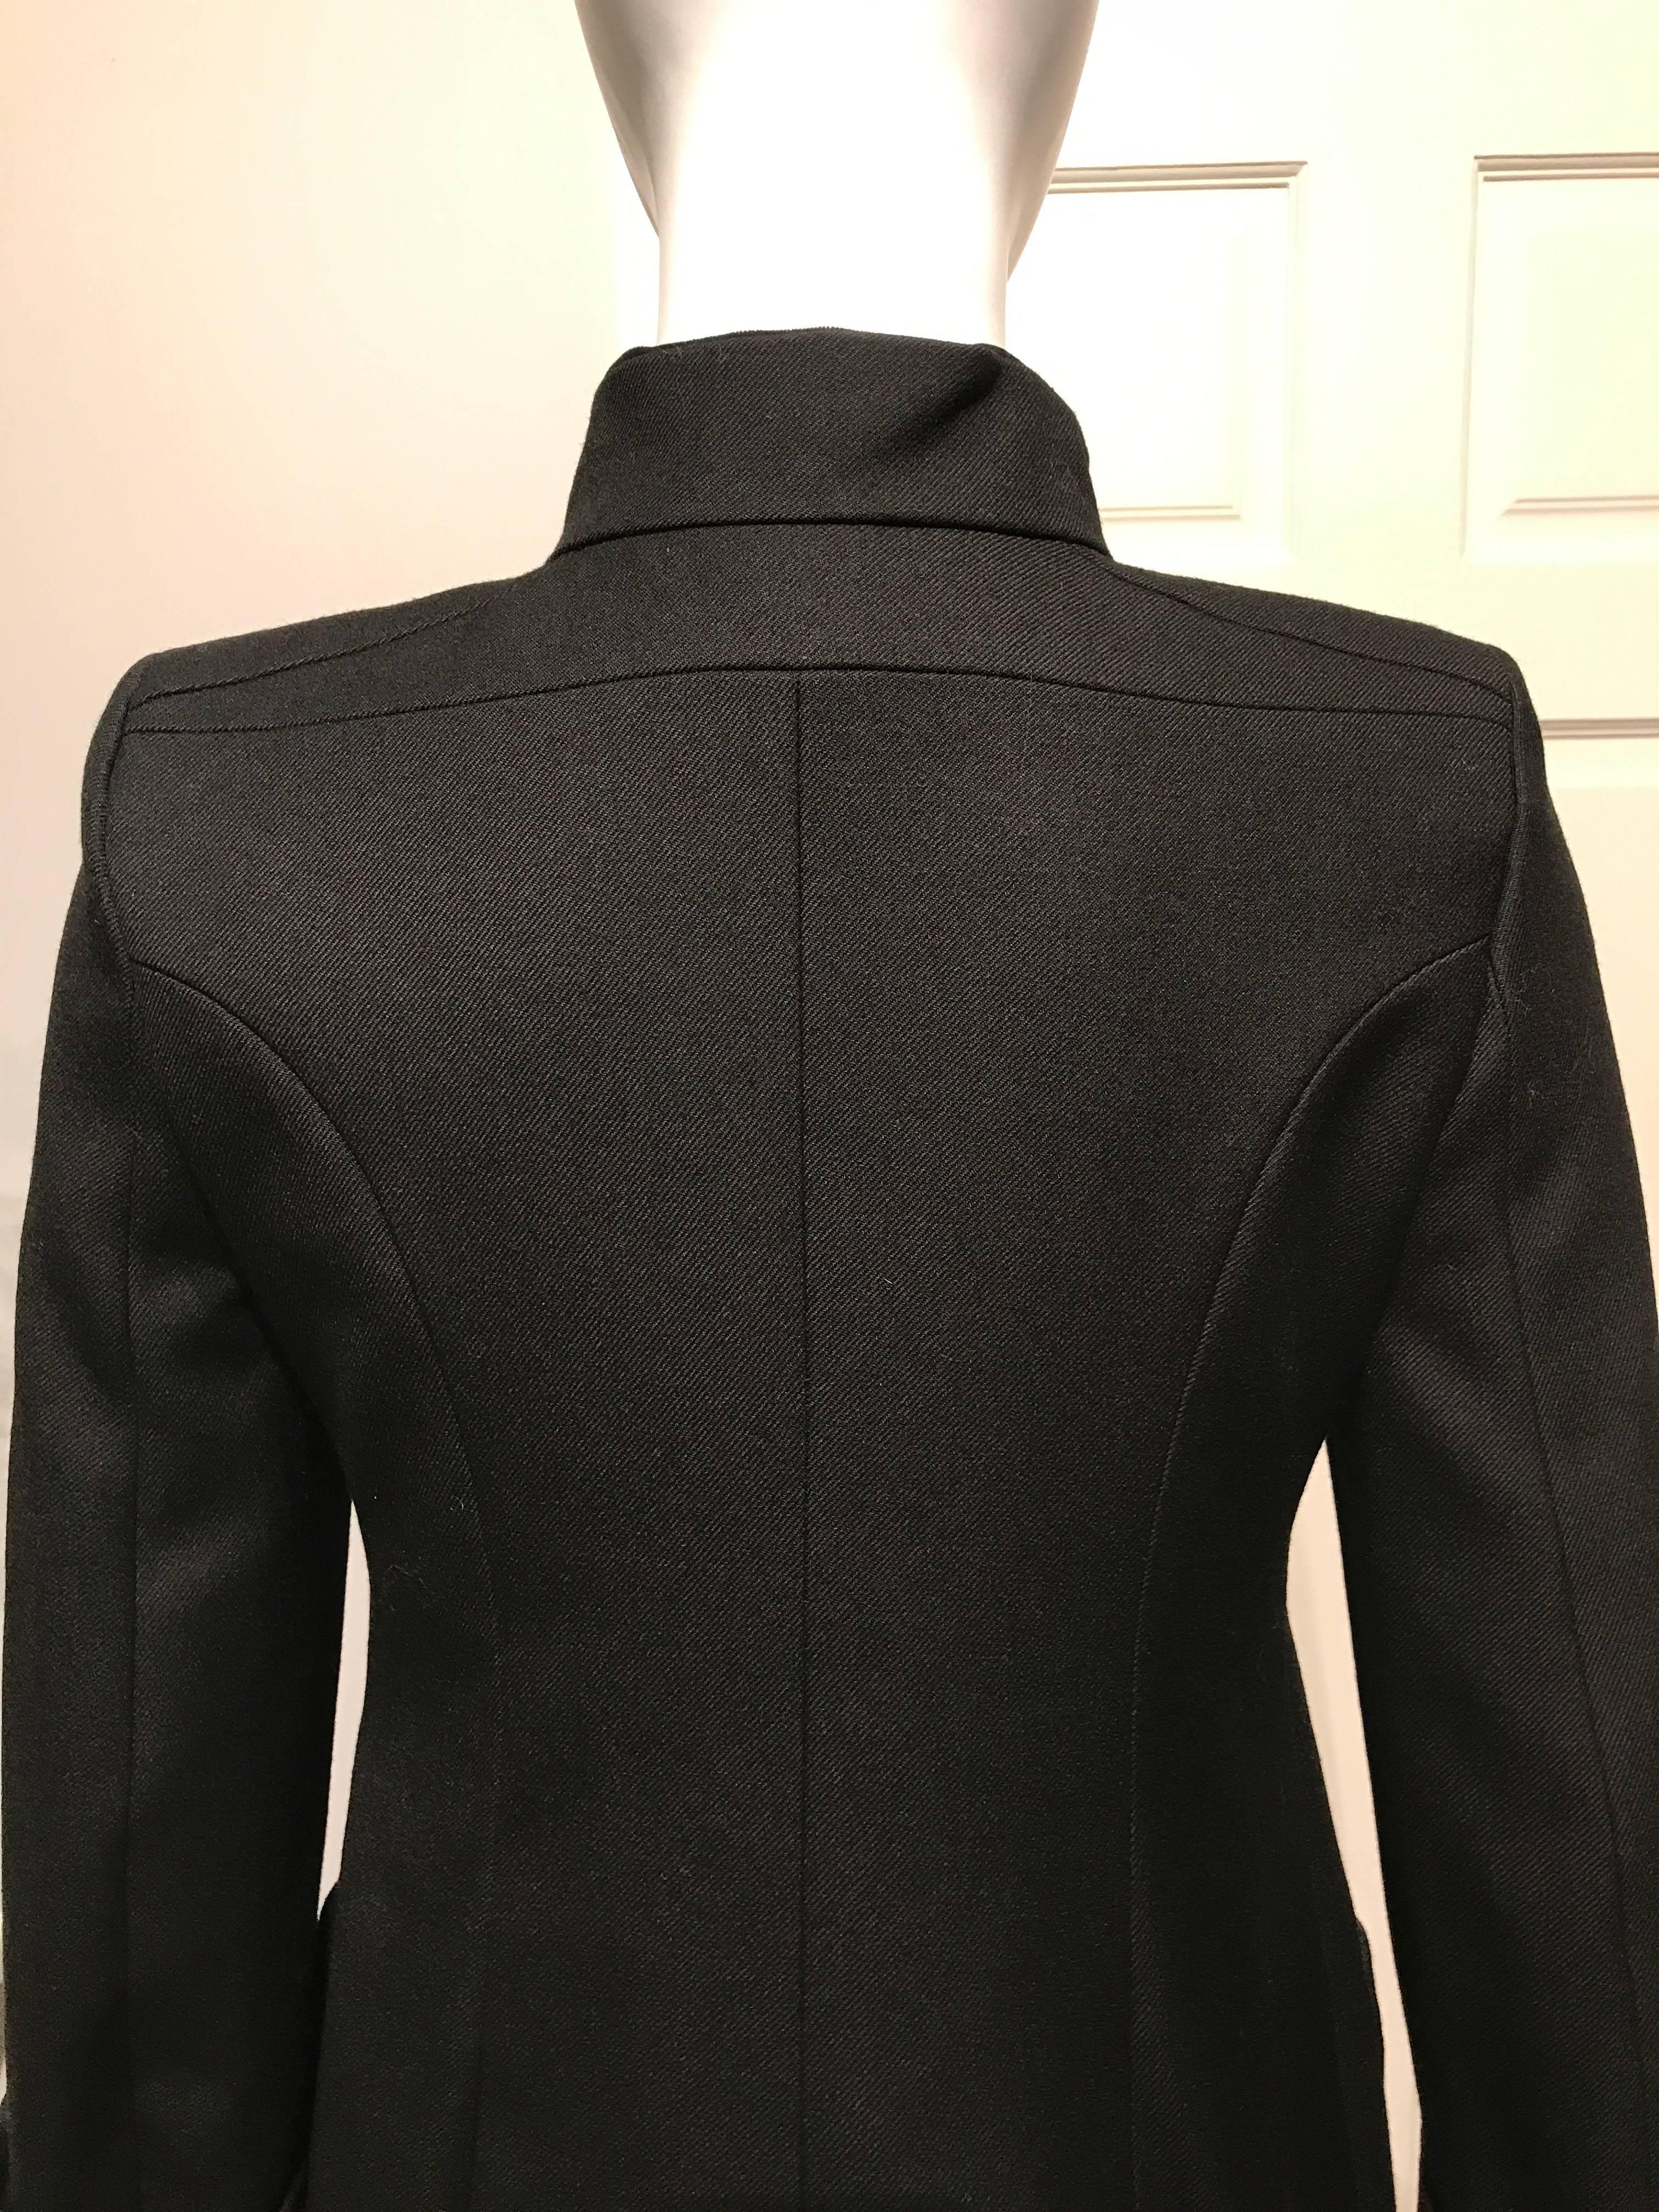 Balenciaga Black Coat With Asian Letters On Breast Pocket For Sale 2